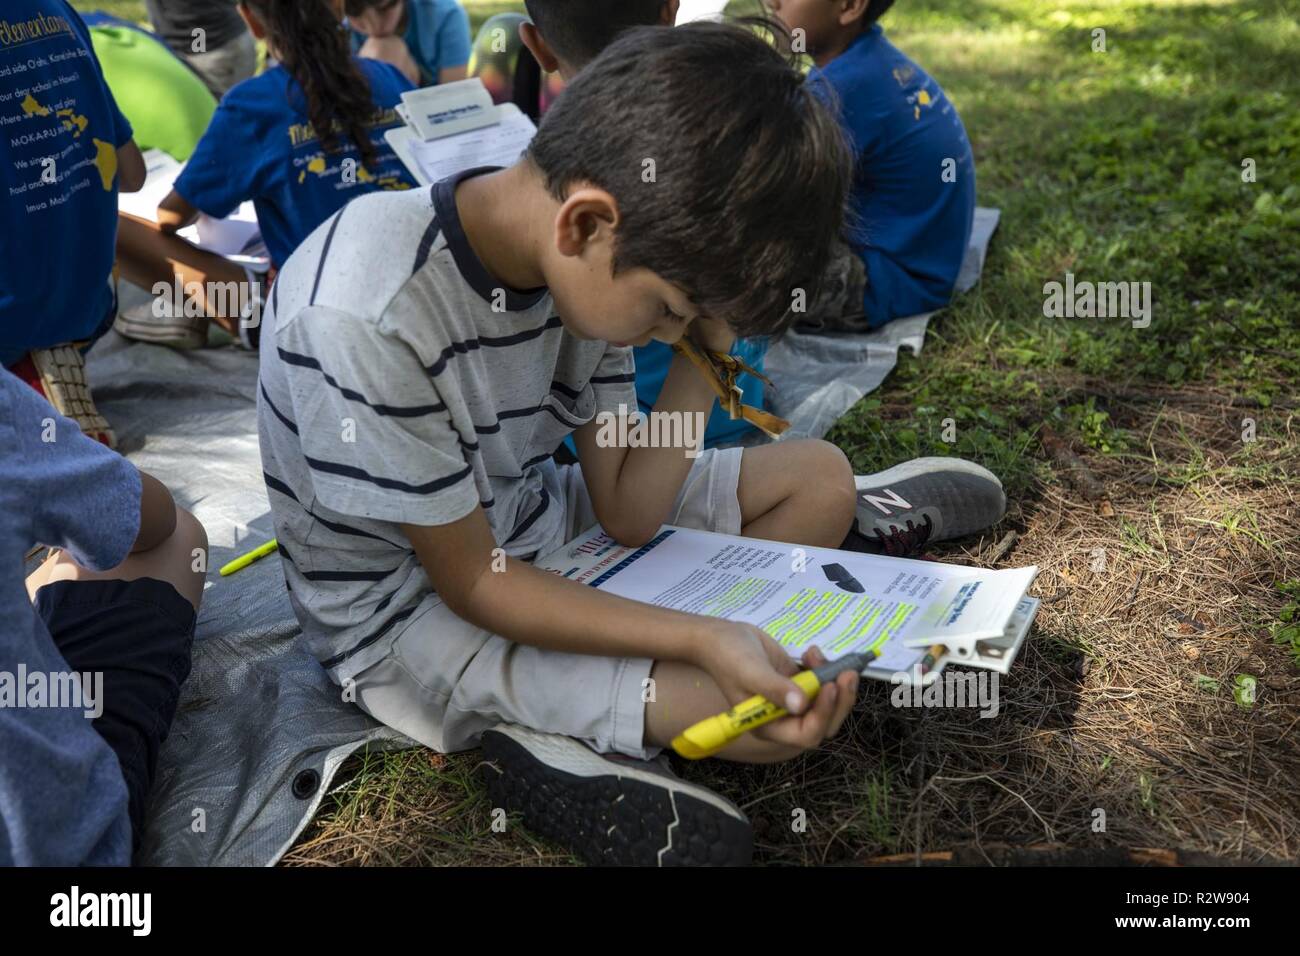 A student with Mokapu Elementary School works on a class assignment at the Nu’ Upia Ponds during a field trip, Marine Corps Base Hawaii, Nov. 14, 2018. The base’s Environmental Department partnered with the school to host a cultural learning field trip to teach students the significance of the ponds and the Hawaiian culture. Stock Photo